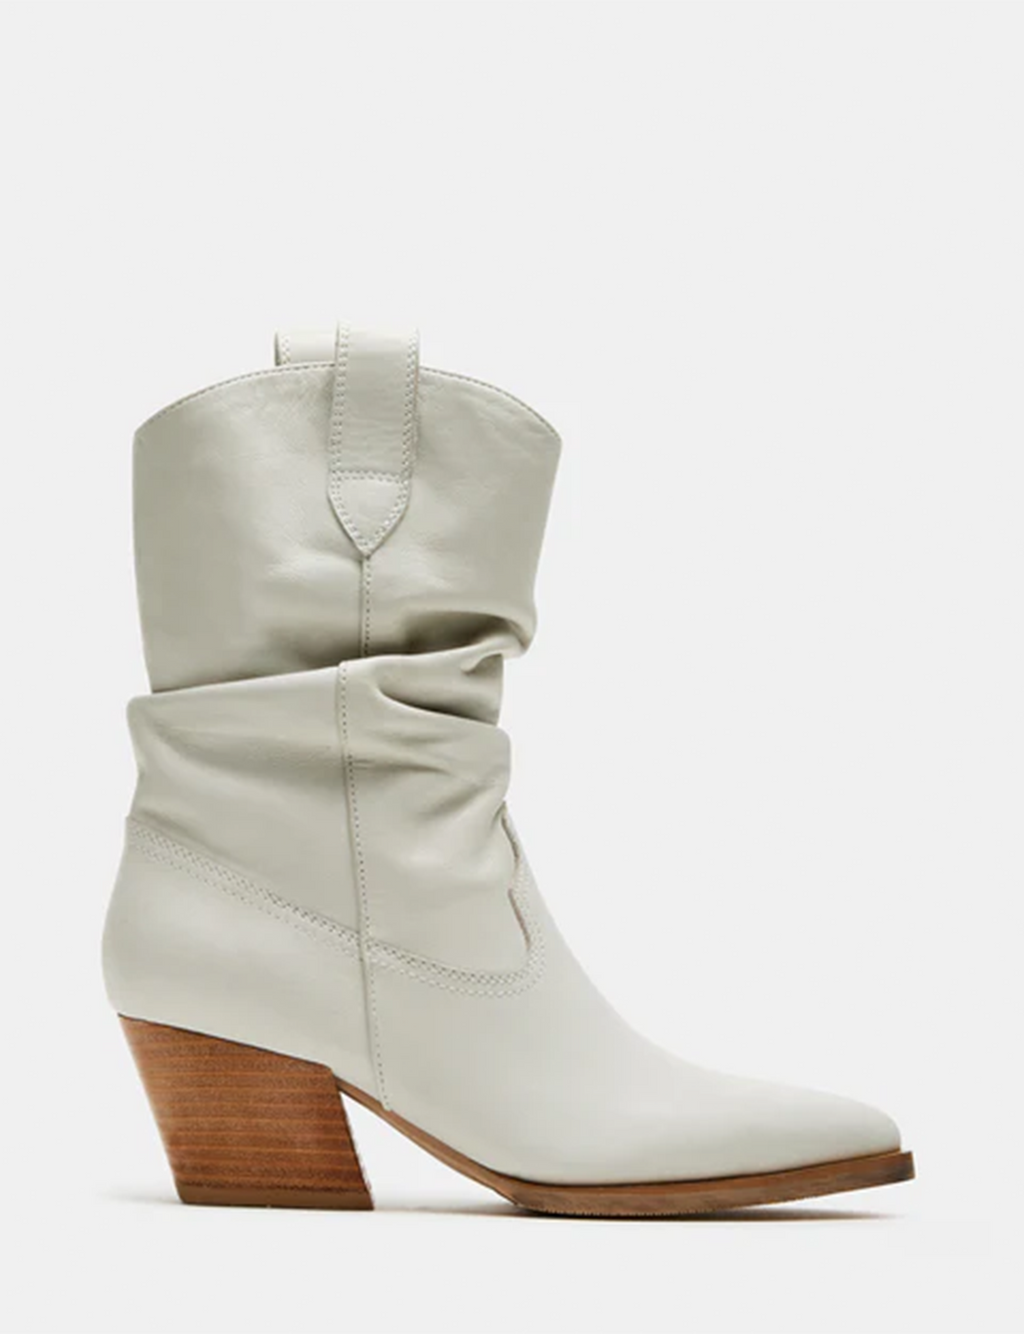 Taos Slouchy Bootie, Bone Leather